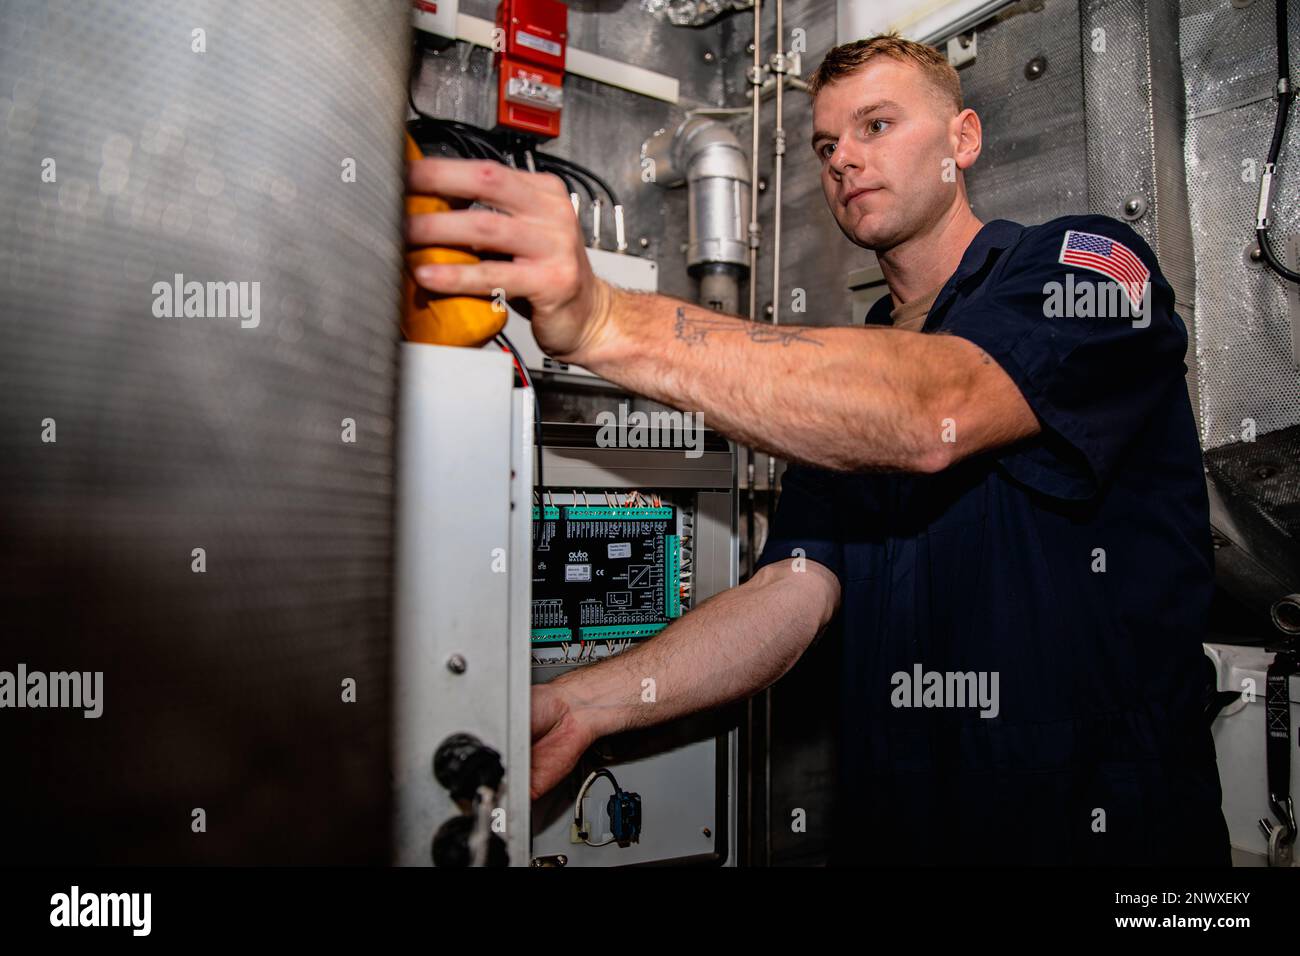 230206-A-NR779-1087 MANAMA, Bahrain (Feb. 6, 2023) U.S. Coast Guard Electrician’s Mate 2nd Class Ivan Markley inspects control panels aboard fast response cutter USCGC Glen Harris (WPC 1144), Feb. 6, while pierside in Manama, Bahrain. Glen Harris is deployed to the U.S. 5th Fleet area of operations to help ensure maritime security and stability in the Middle East region. Stock Photo